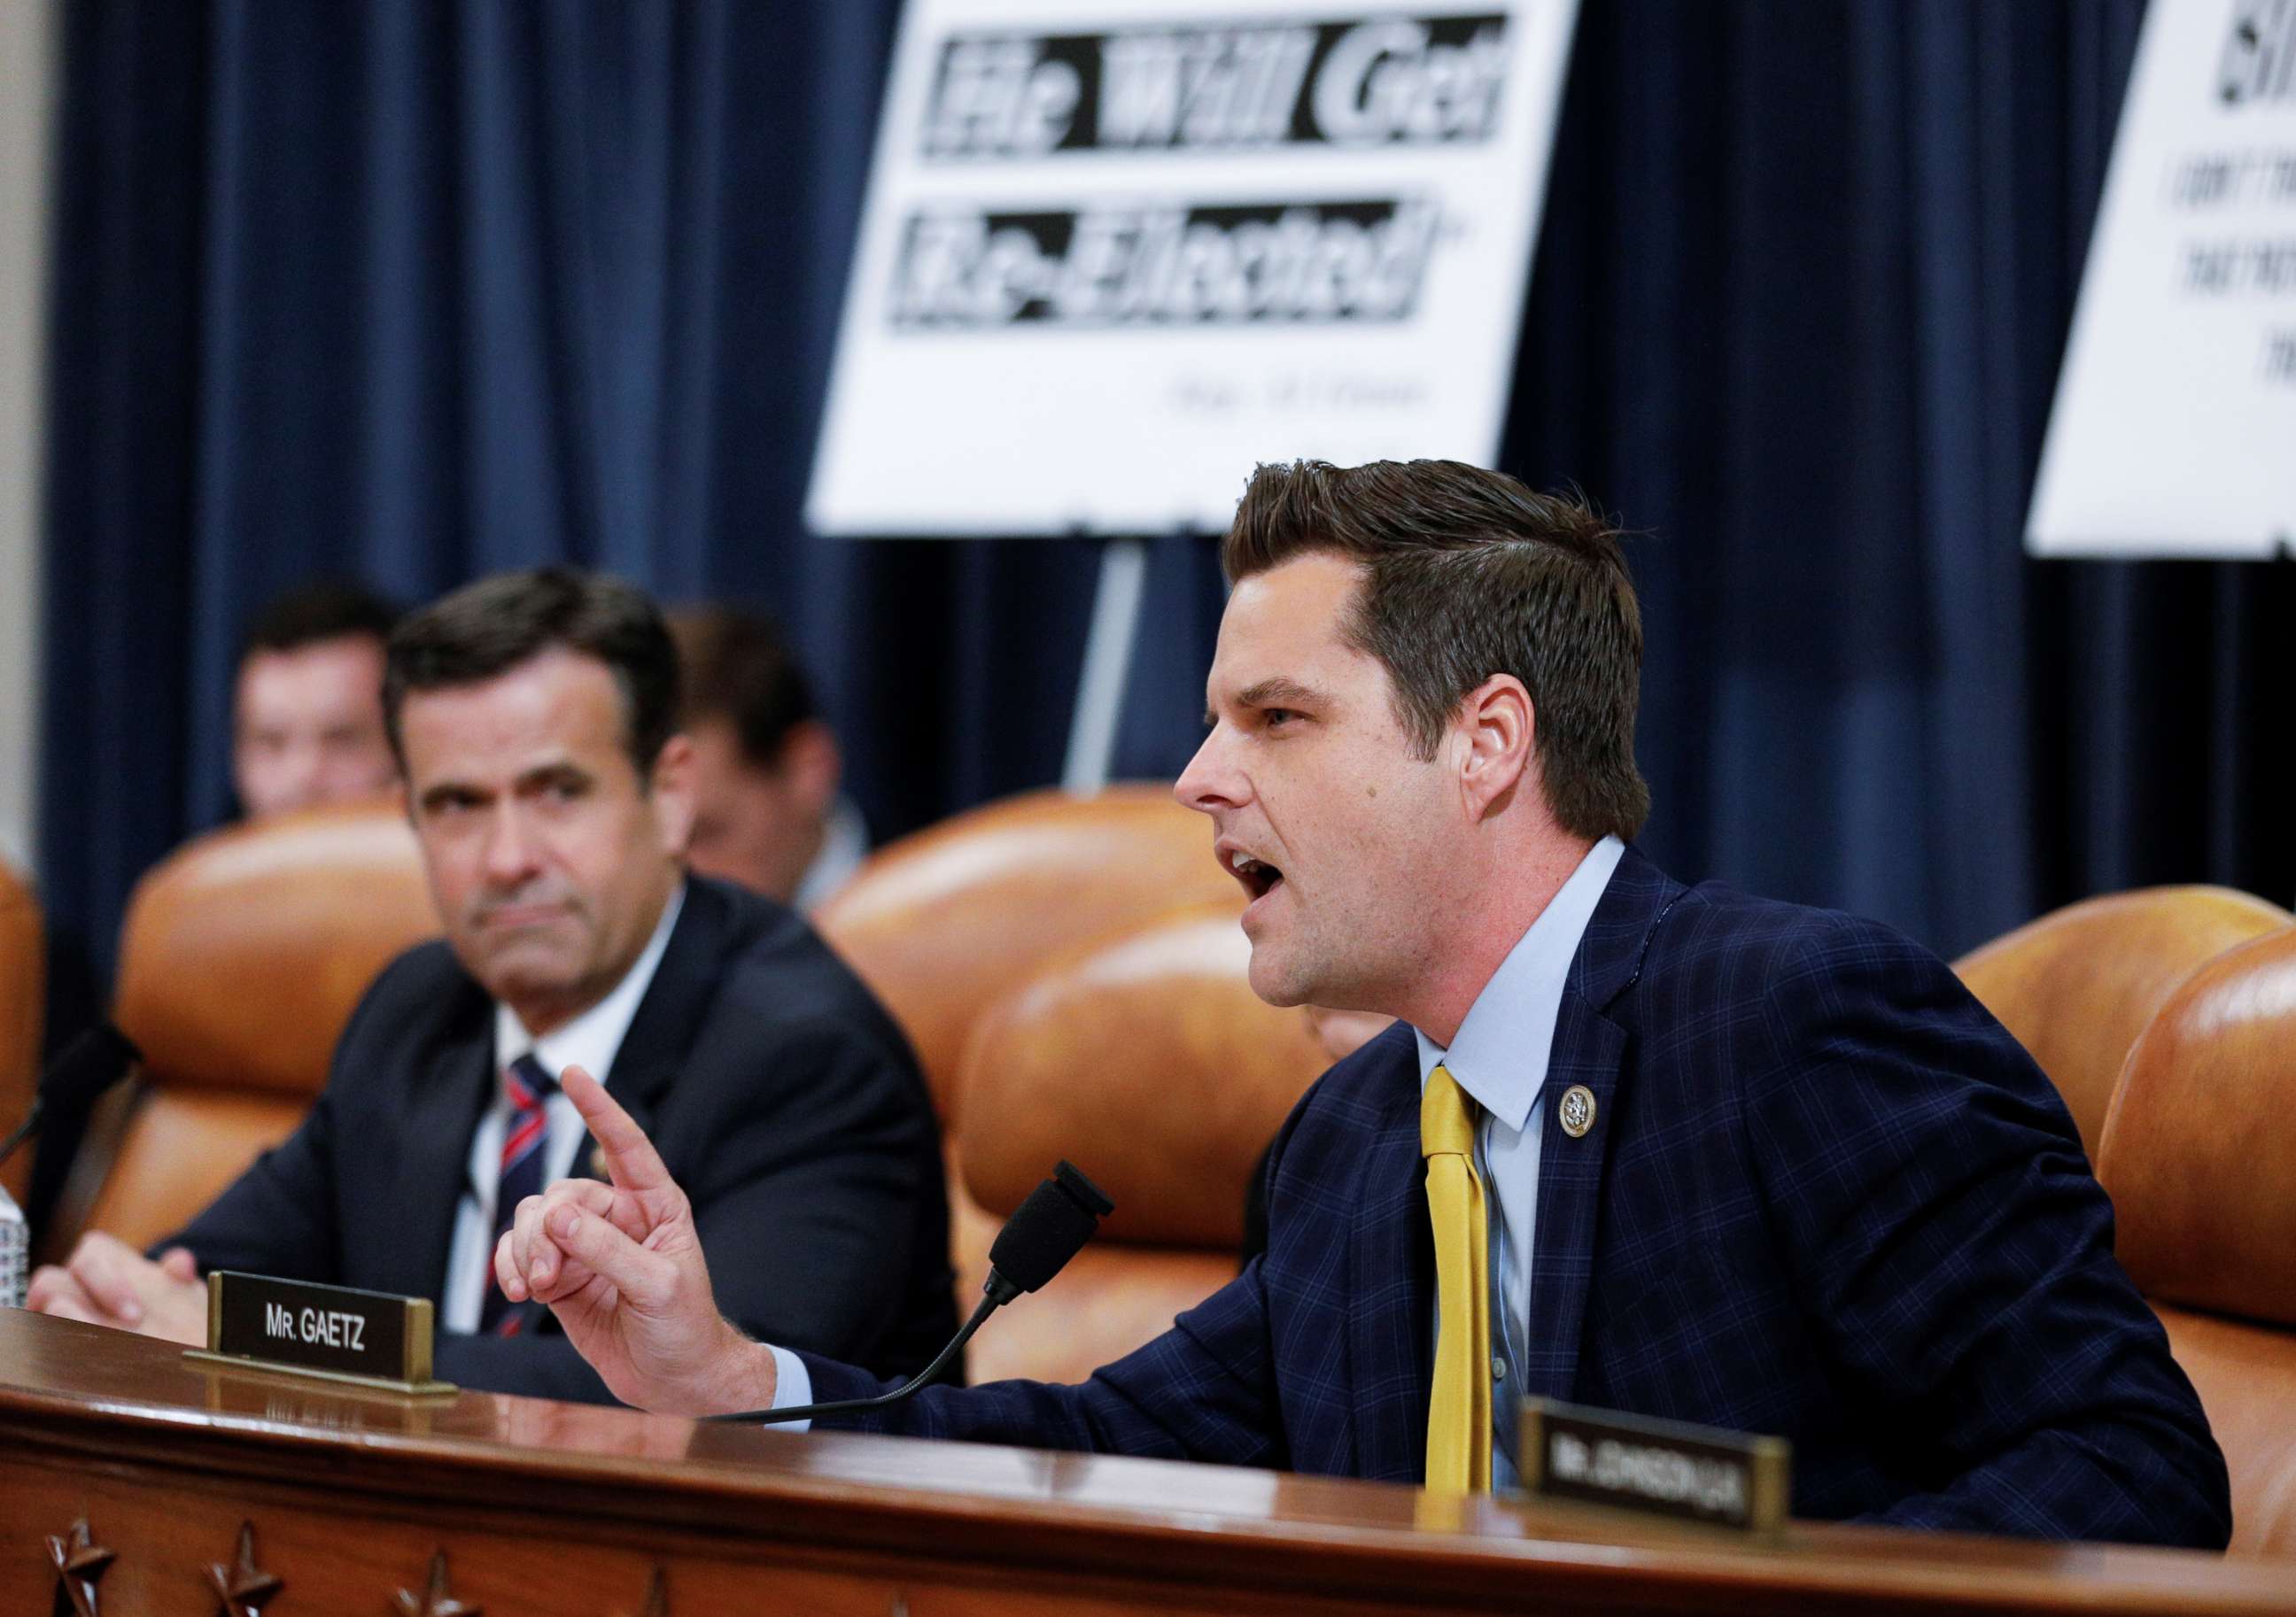 PHOTO: Rep. Matt Gaetz speaks as Rep. John Ratcliffe looks on during the House Judiciary Committee's first hearing on the impeachment inquiry into President Donald Trump on Capitol Hill in Washington, Dec. 4, 2019.